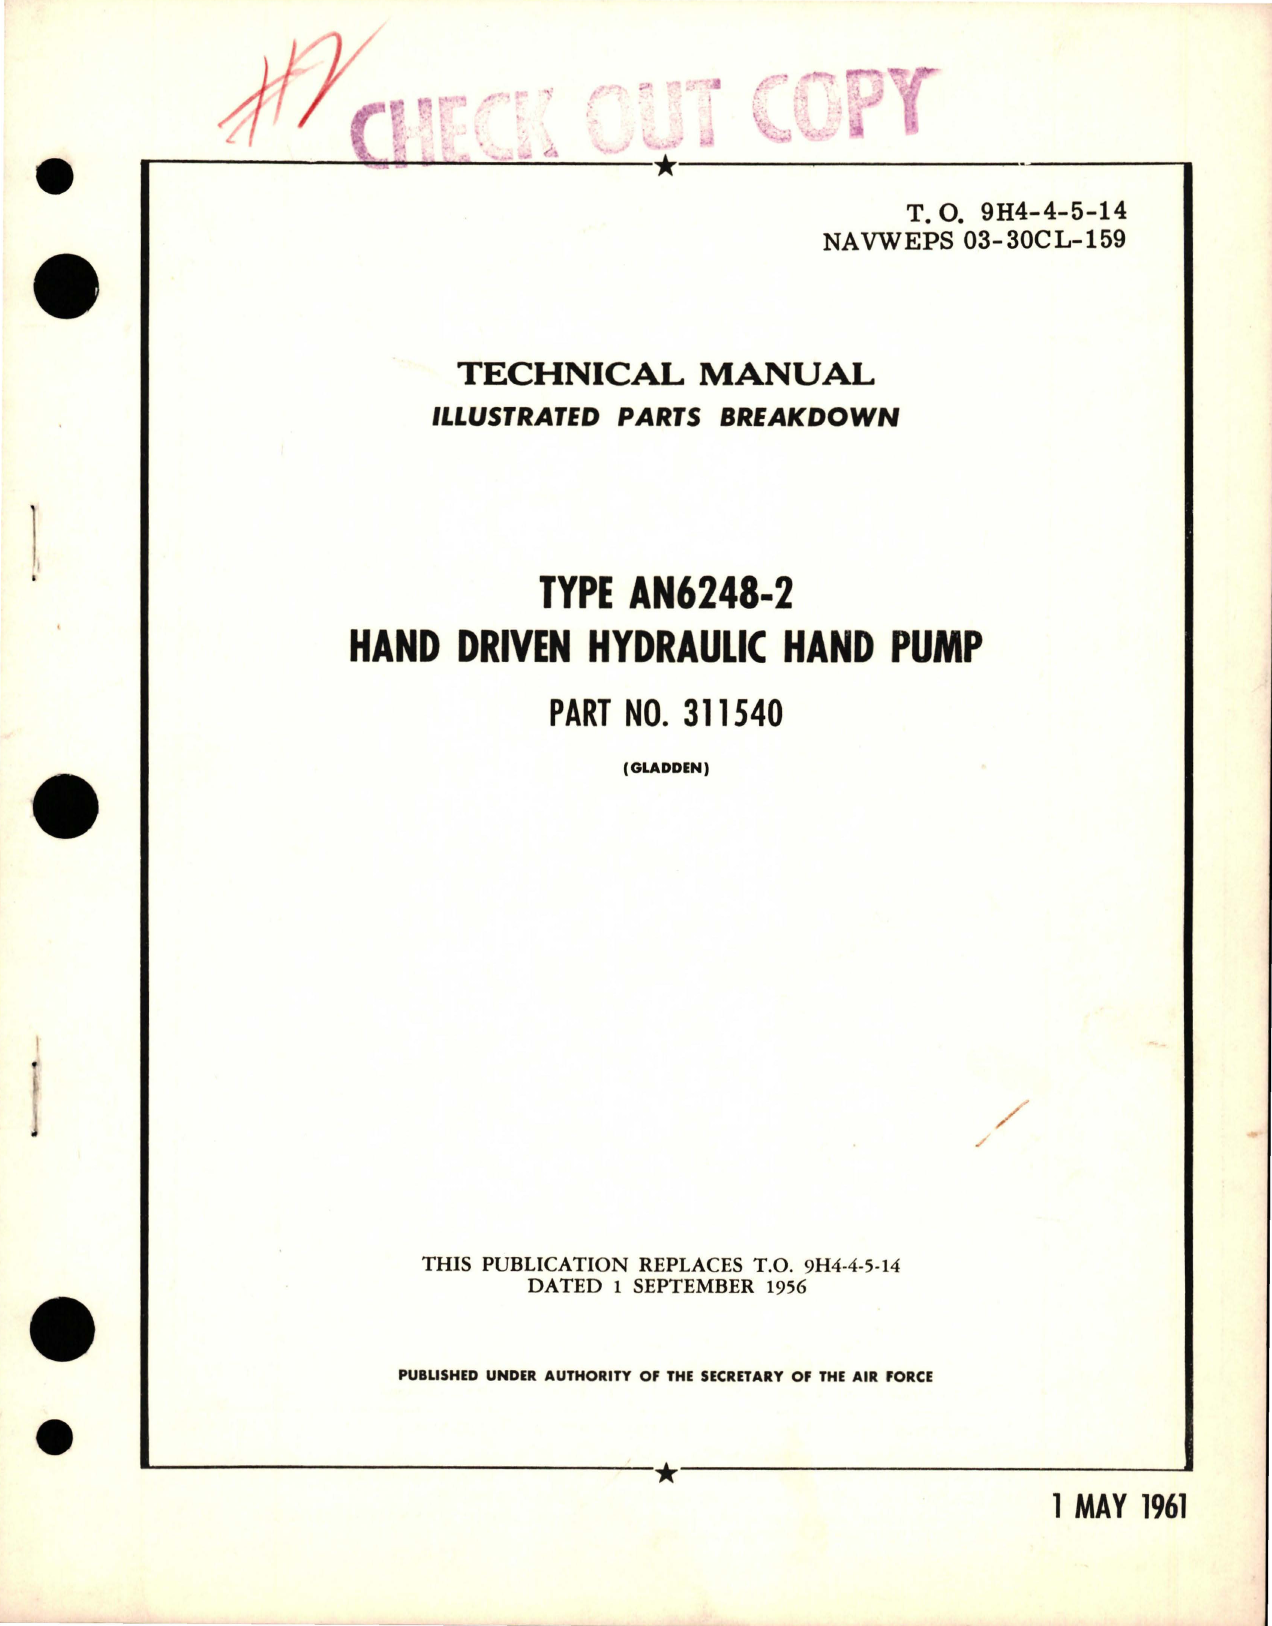 Sample page 1 from AirCorps Library document: Illustrated Parts for Hand Driven Hydraulic Hand Pump - Type AN6248-2 - Part 311540